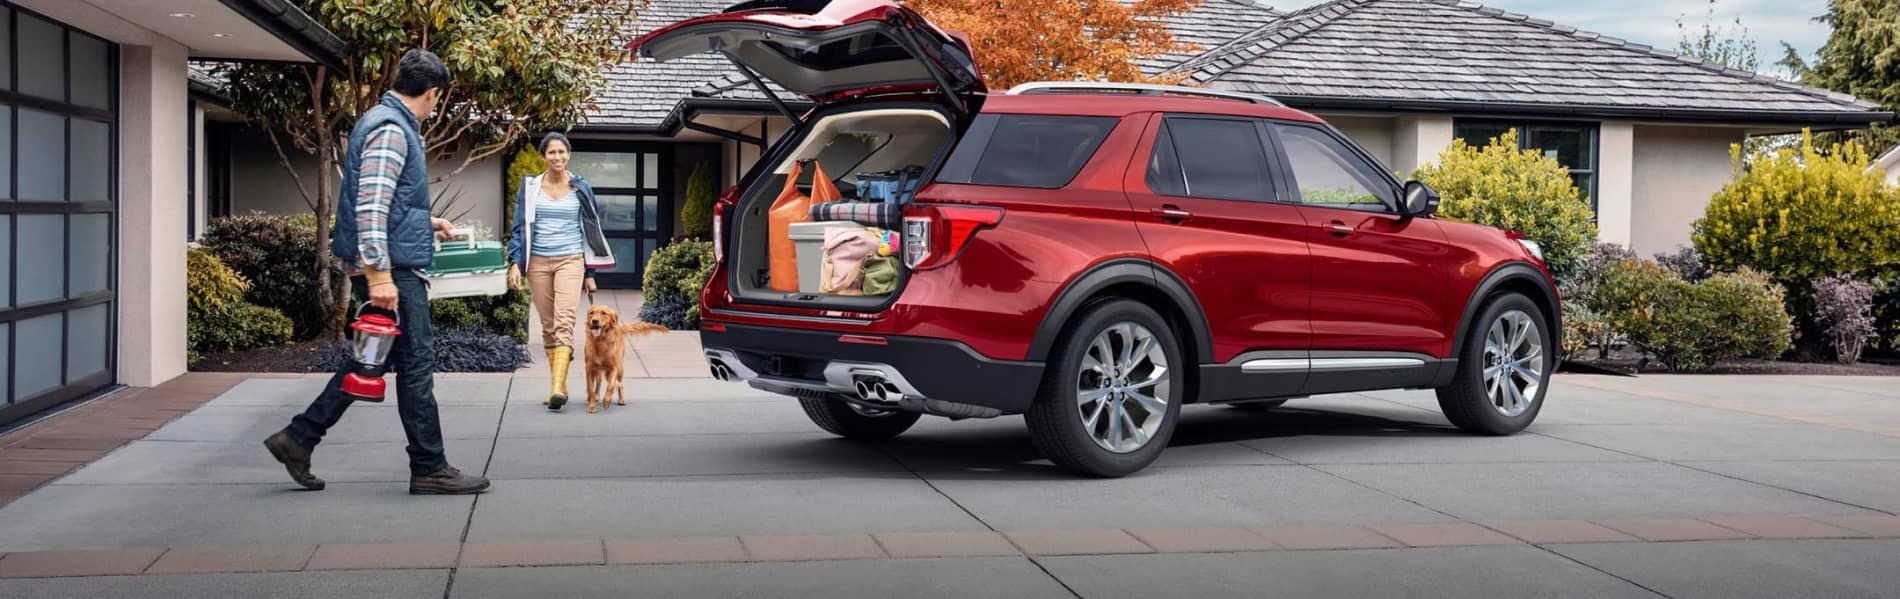 Family unloading items from the trunk of their Ford SUV